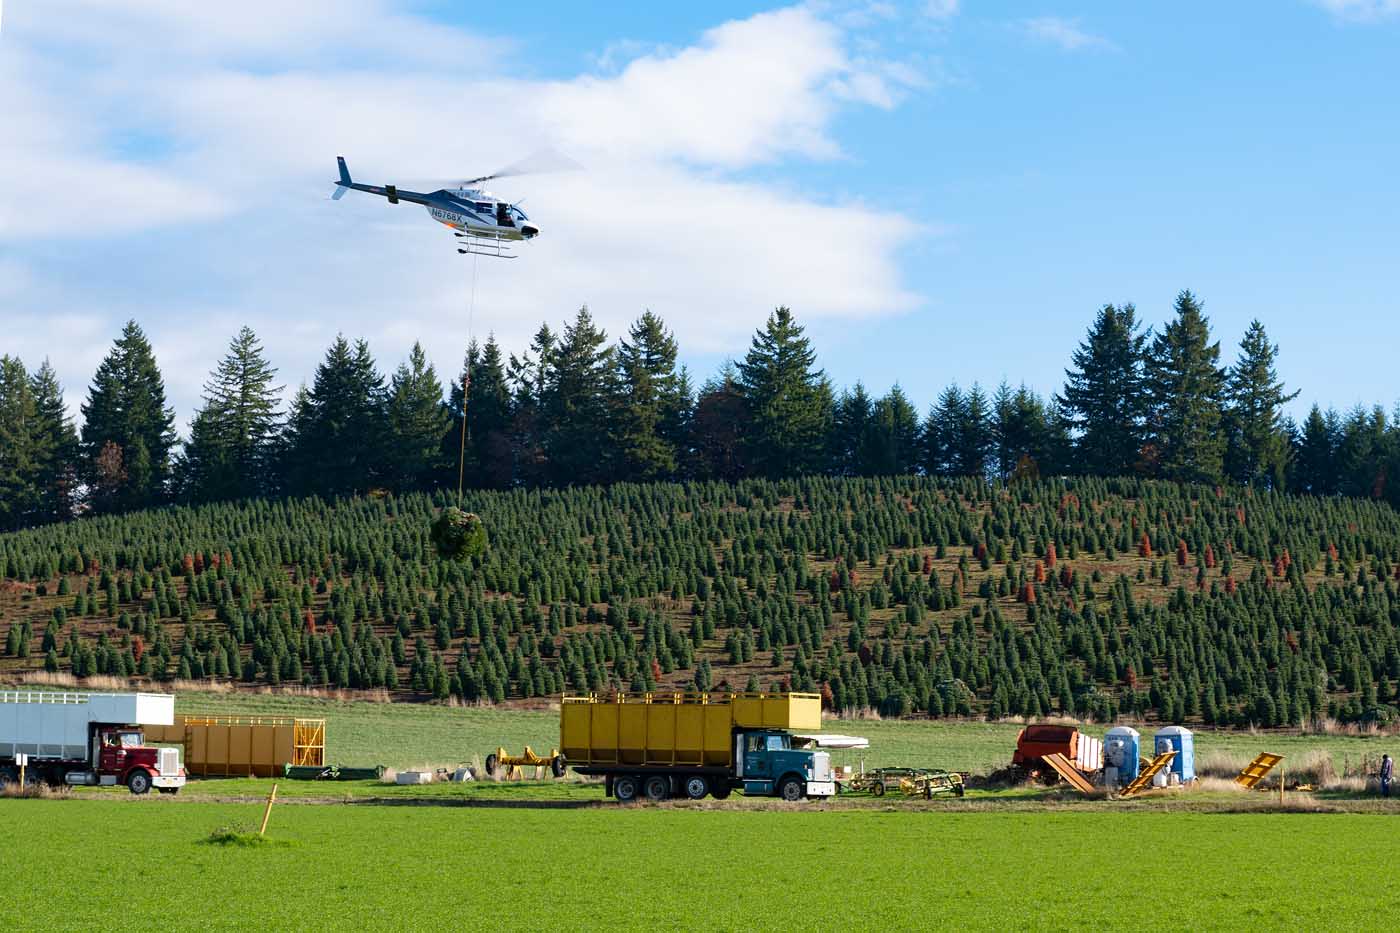 Harvesting Christmas trees by helicopter - Vertical Mag